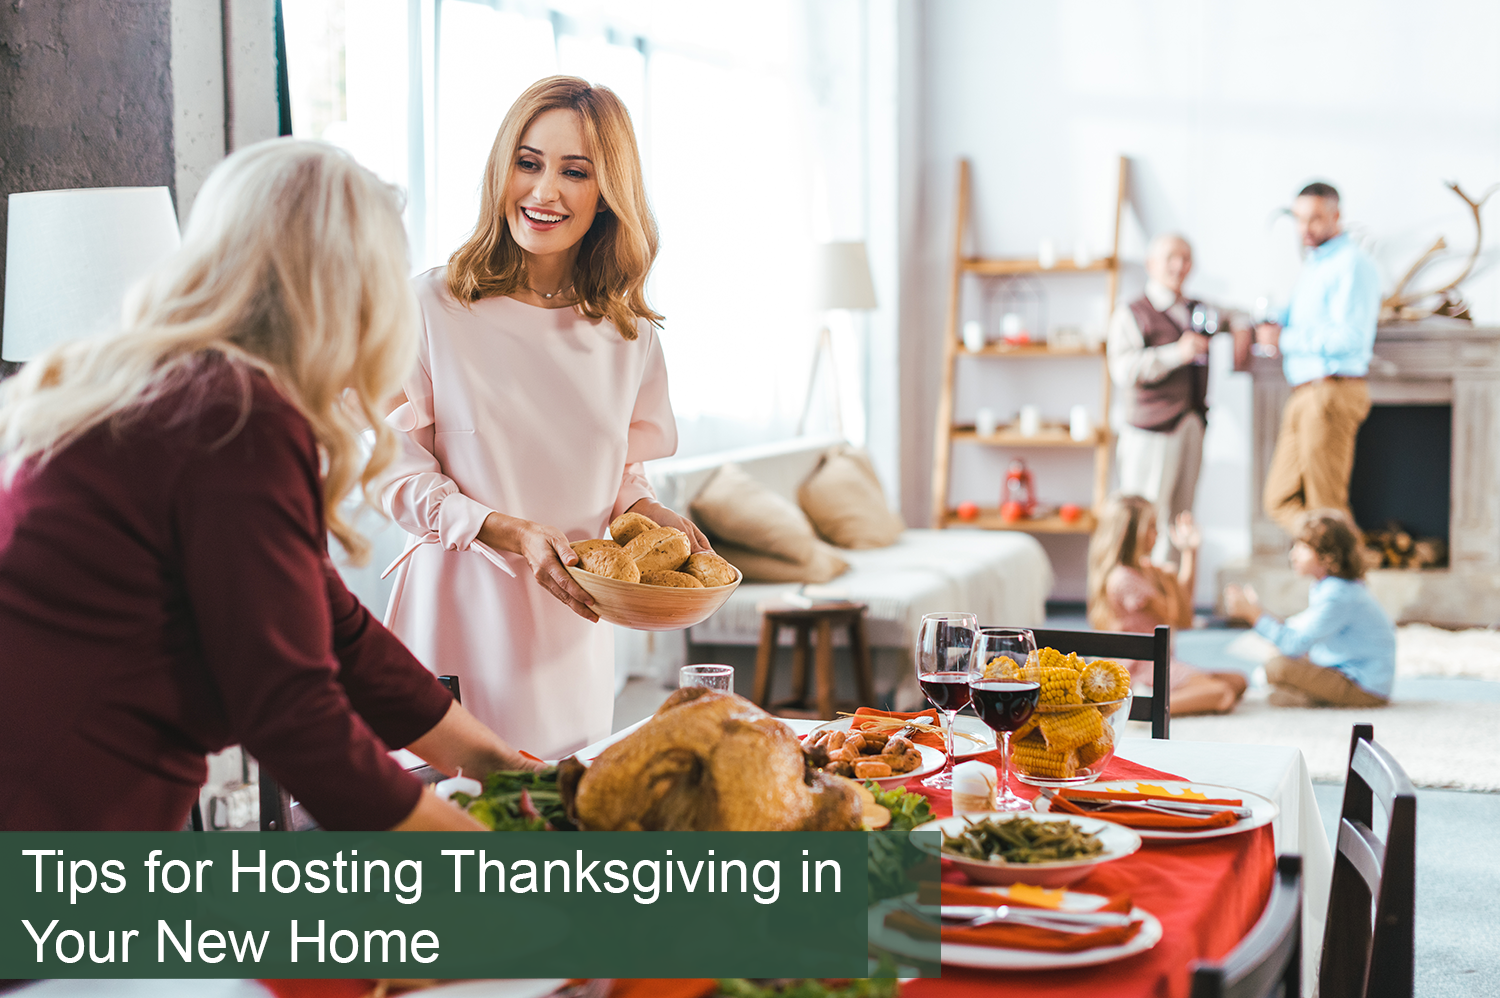 A woman hosting Thanksgiving dinner in her new home with her family around her.